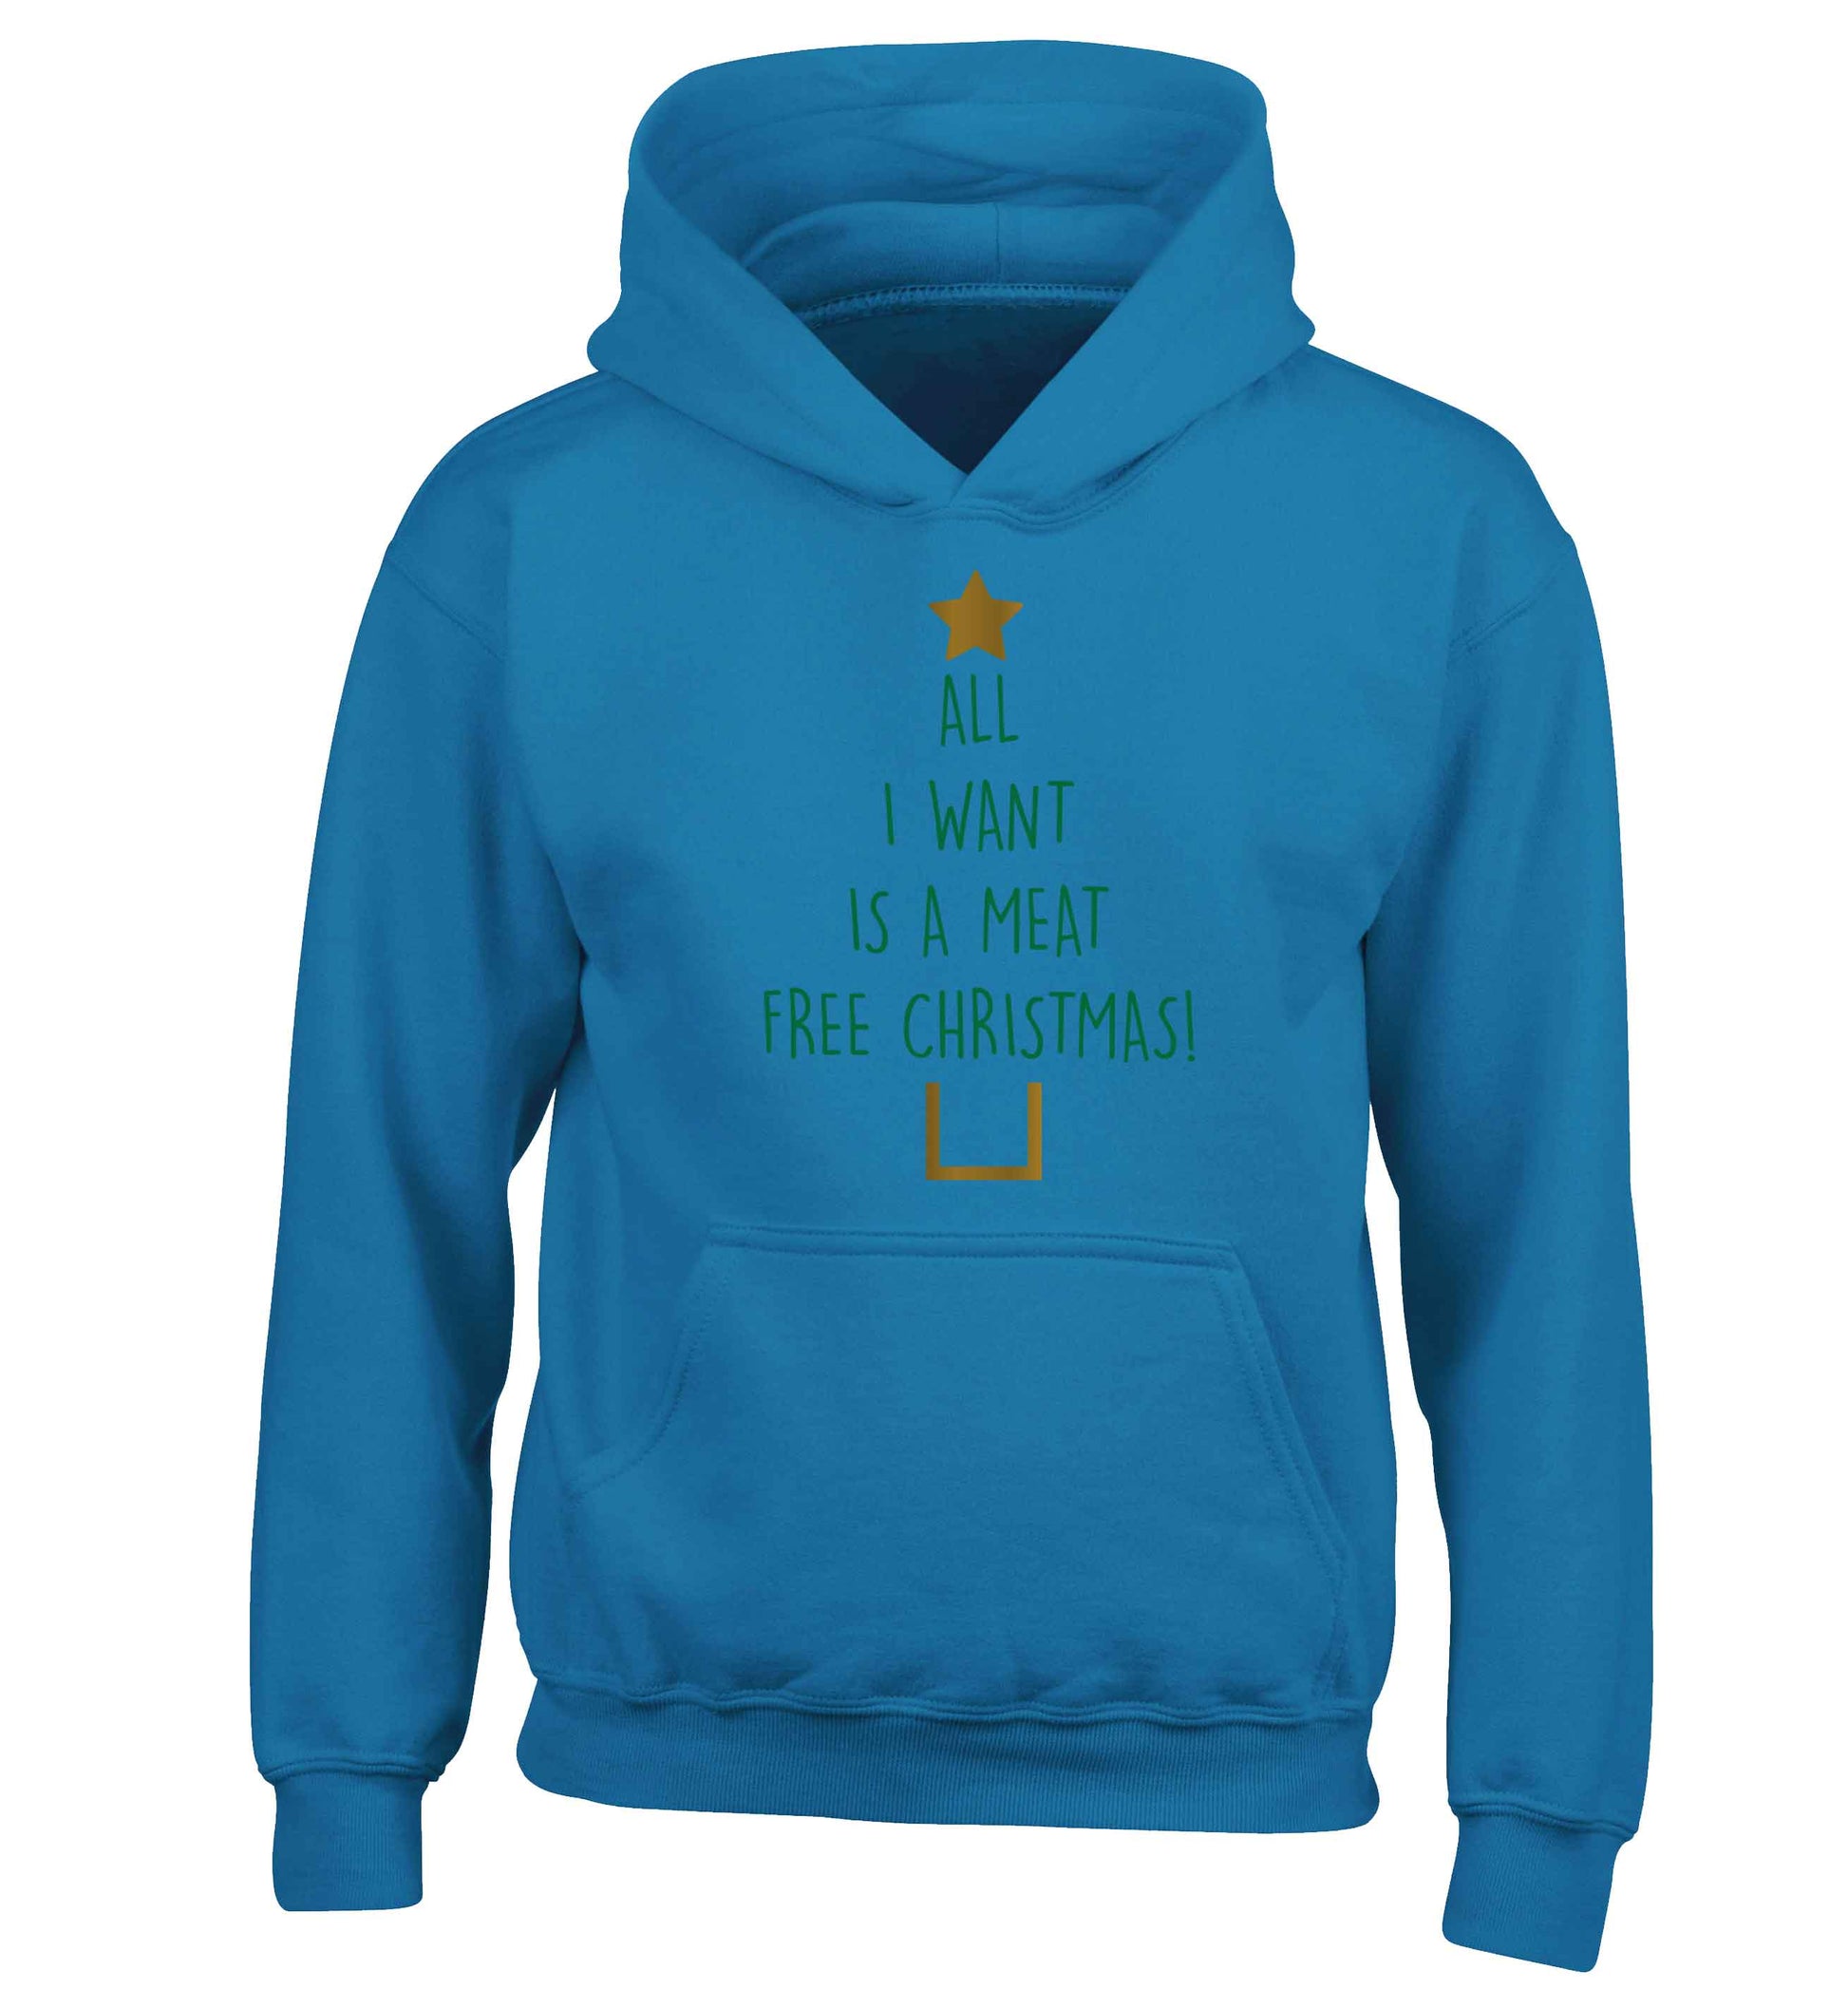 All I want is a meat free Christmas children's blue hoodie 12-13 Years